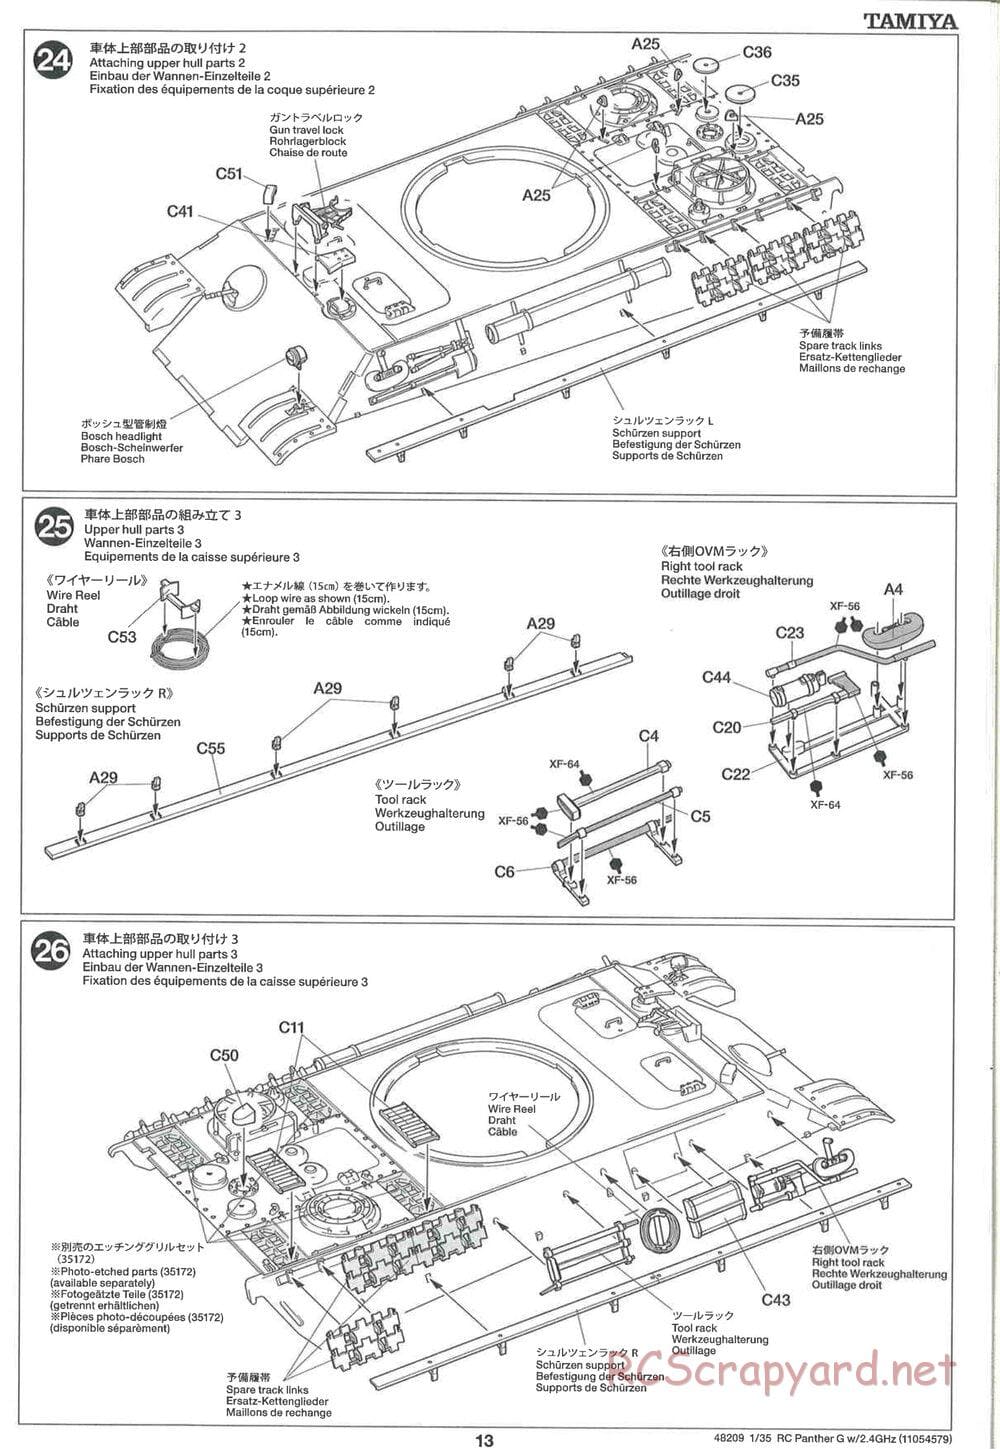 Tamiya - German Panther Type G - Late Version - 1/35 Scale Chassis - Manual - Page 13